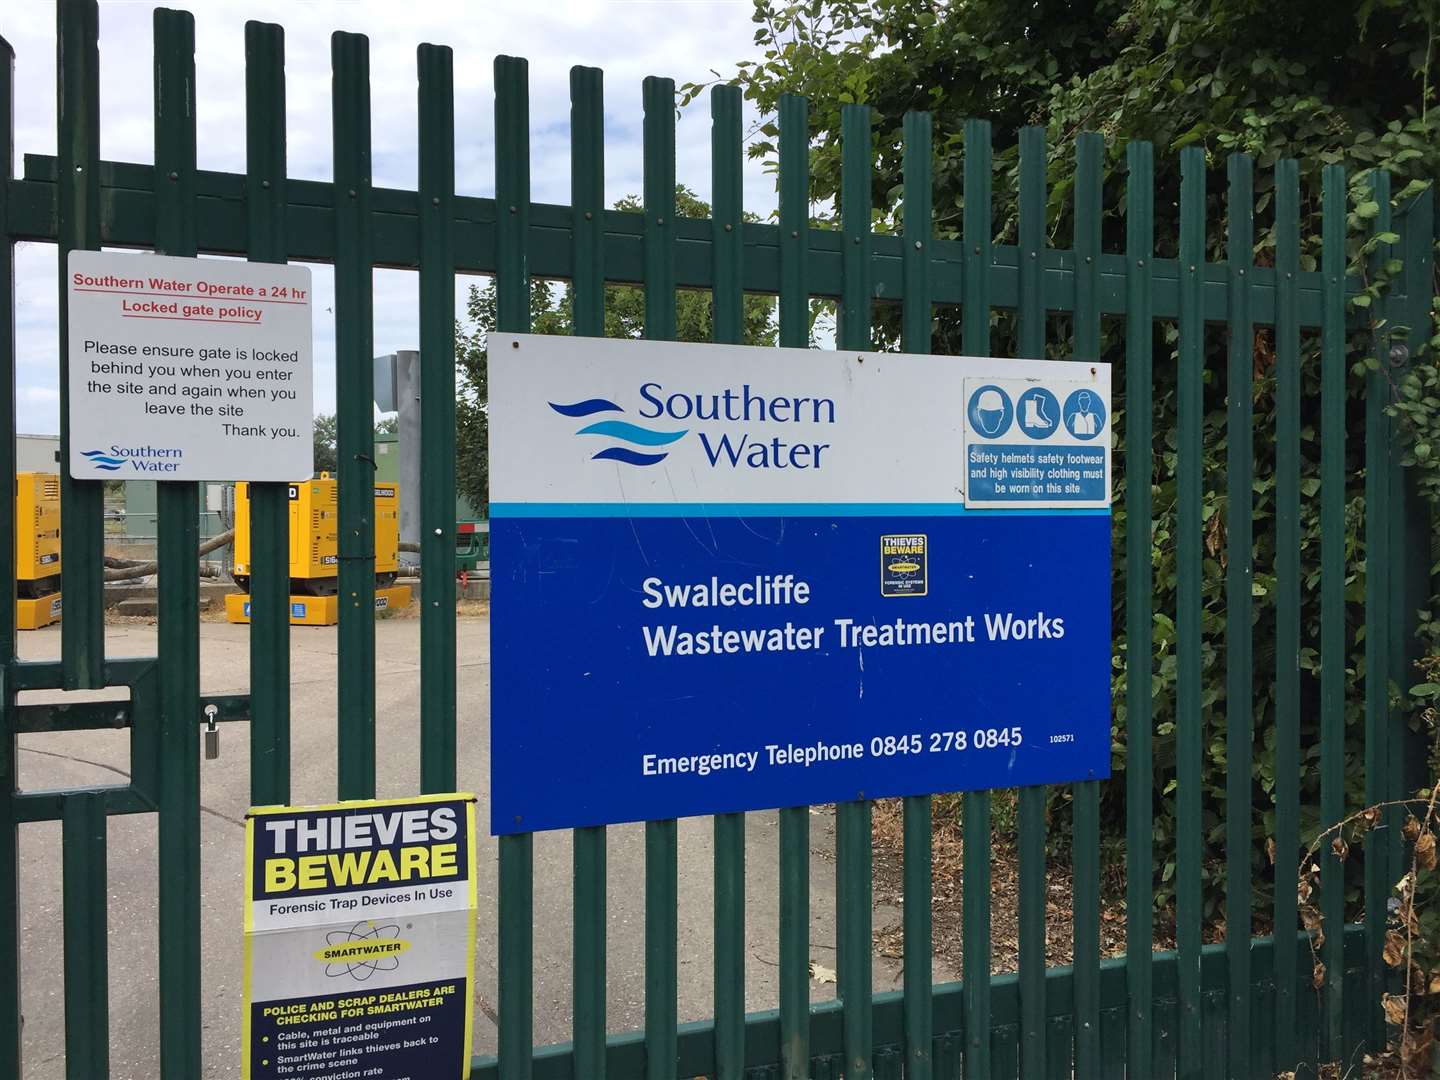 Southern Water Treatment Plant at Swalecliffe